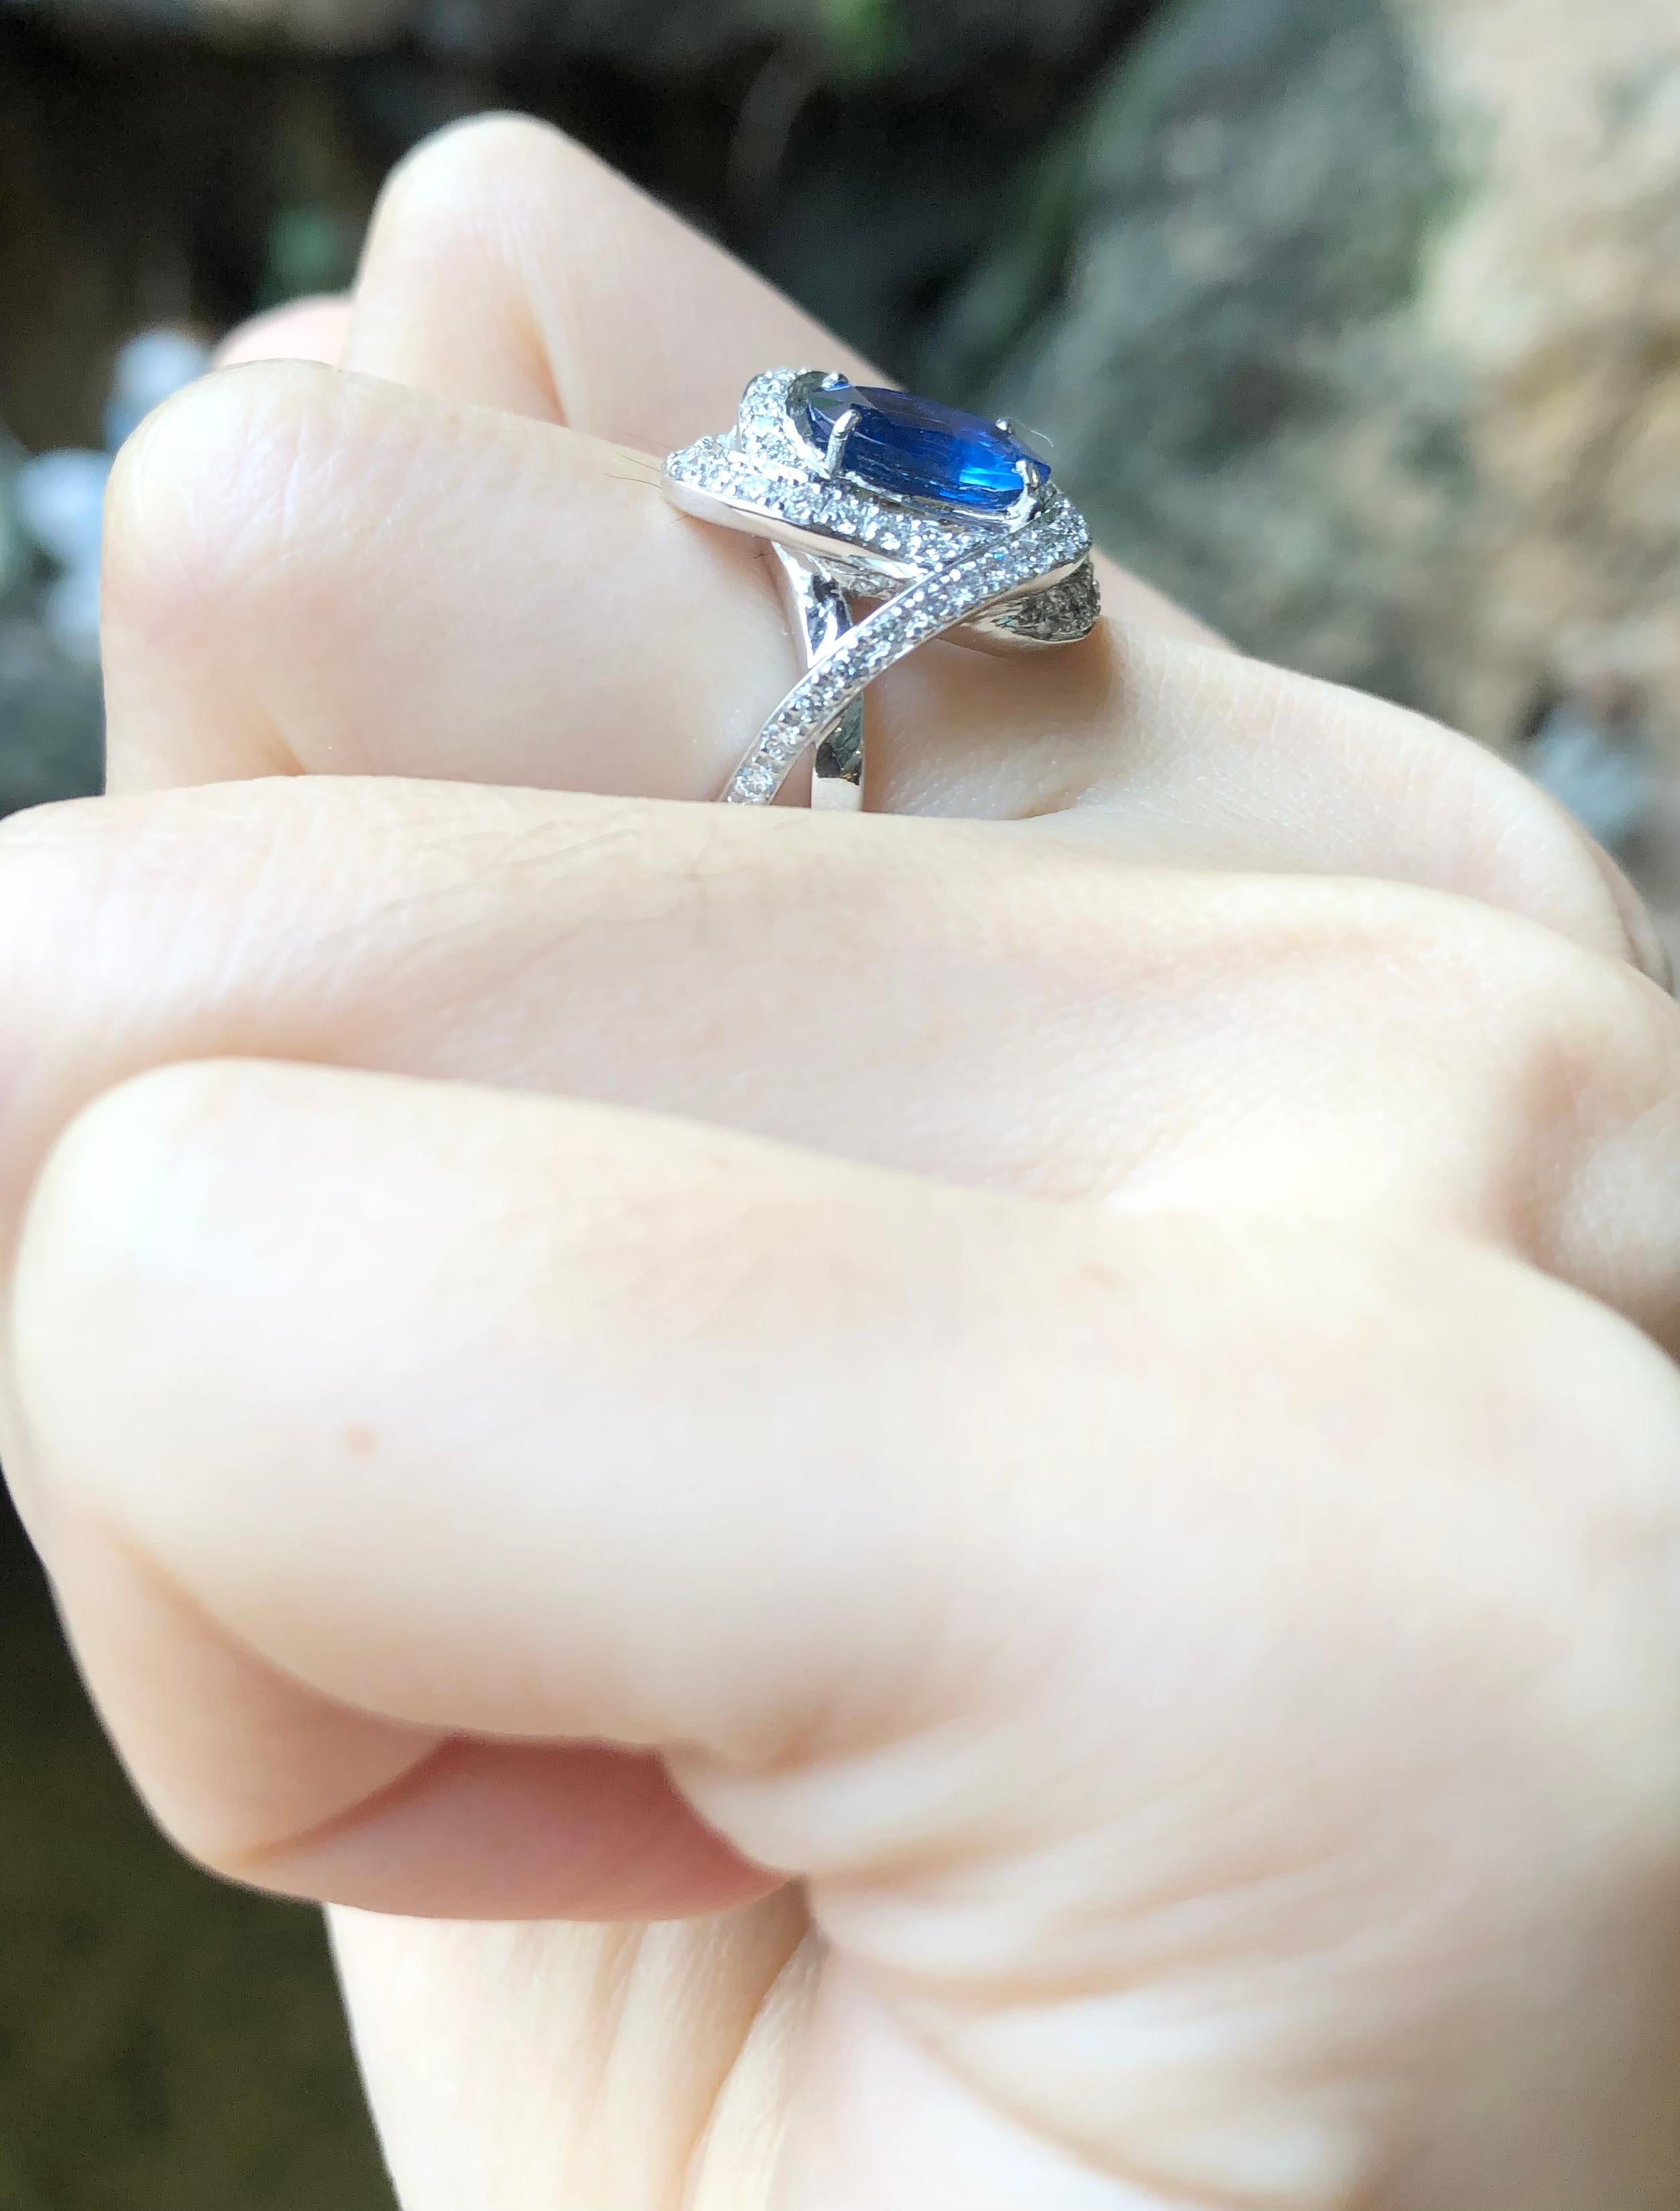 Blue Sapphire 1.95 carats with Diamond 0.57 carat Ring set in 18 Karat White Gold Settings

Width:  1.1 cm 
Length: 1.7 cm
Ring Size: 51
Total Weight: 9.4 grams

Blue Sapphire 
Width:  0.5 cm 
Length: 0.8 cm

